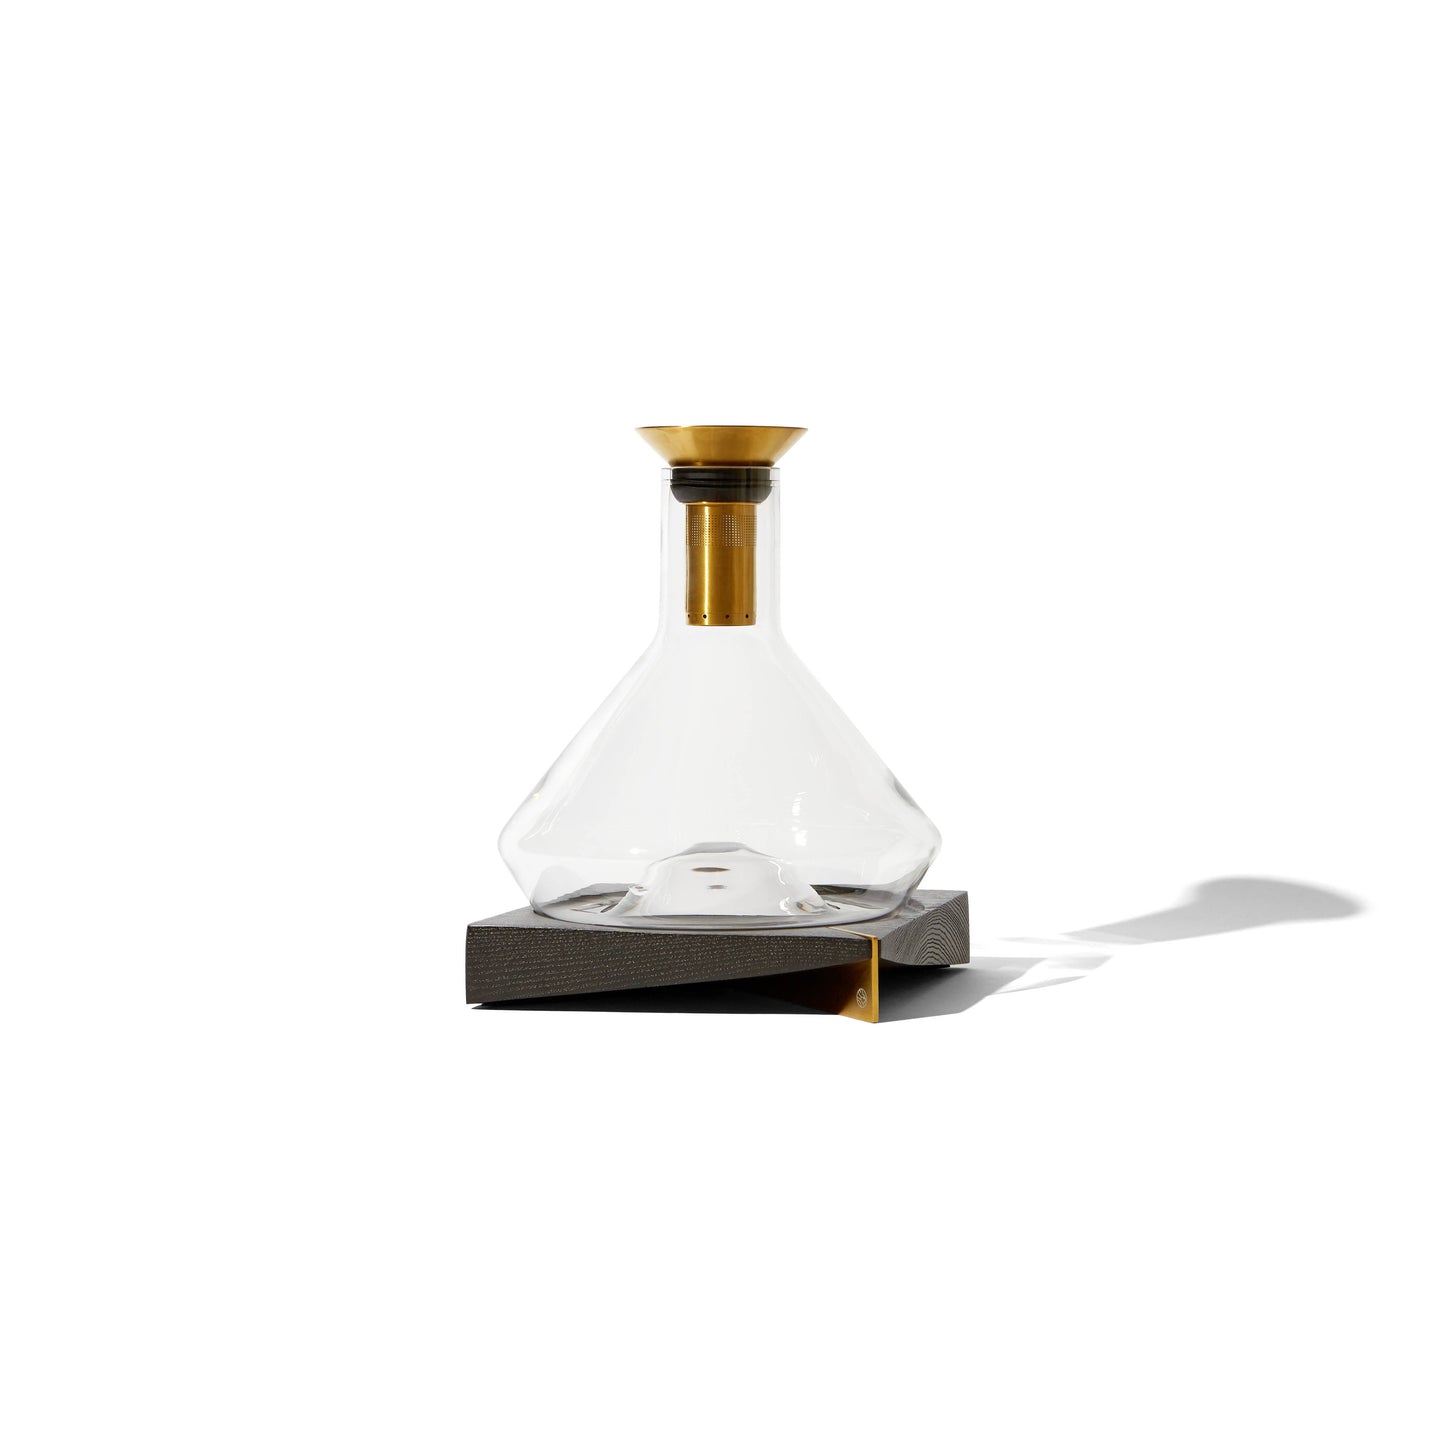 modern, geometric decanter with brass colored, stainless steel accents. Includes base for it to be displayed.  